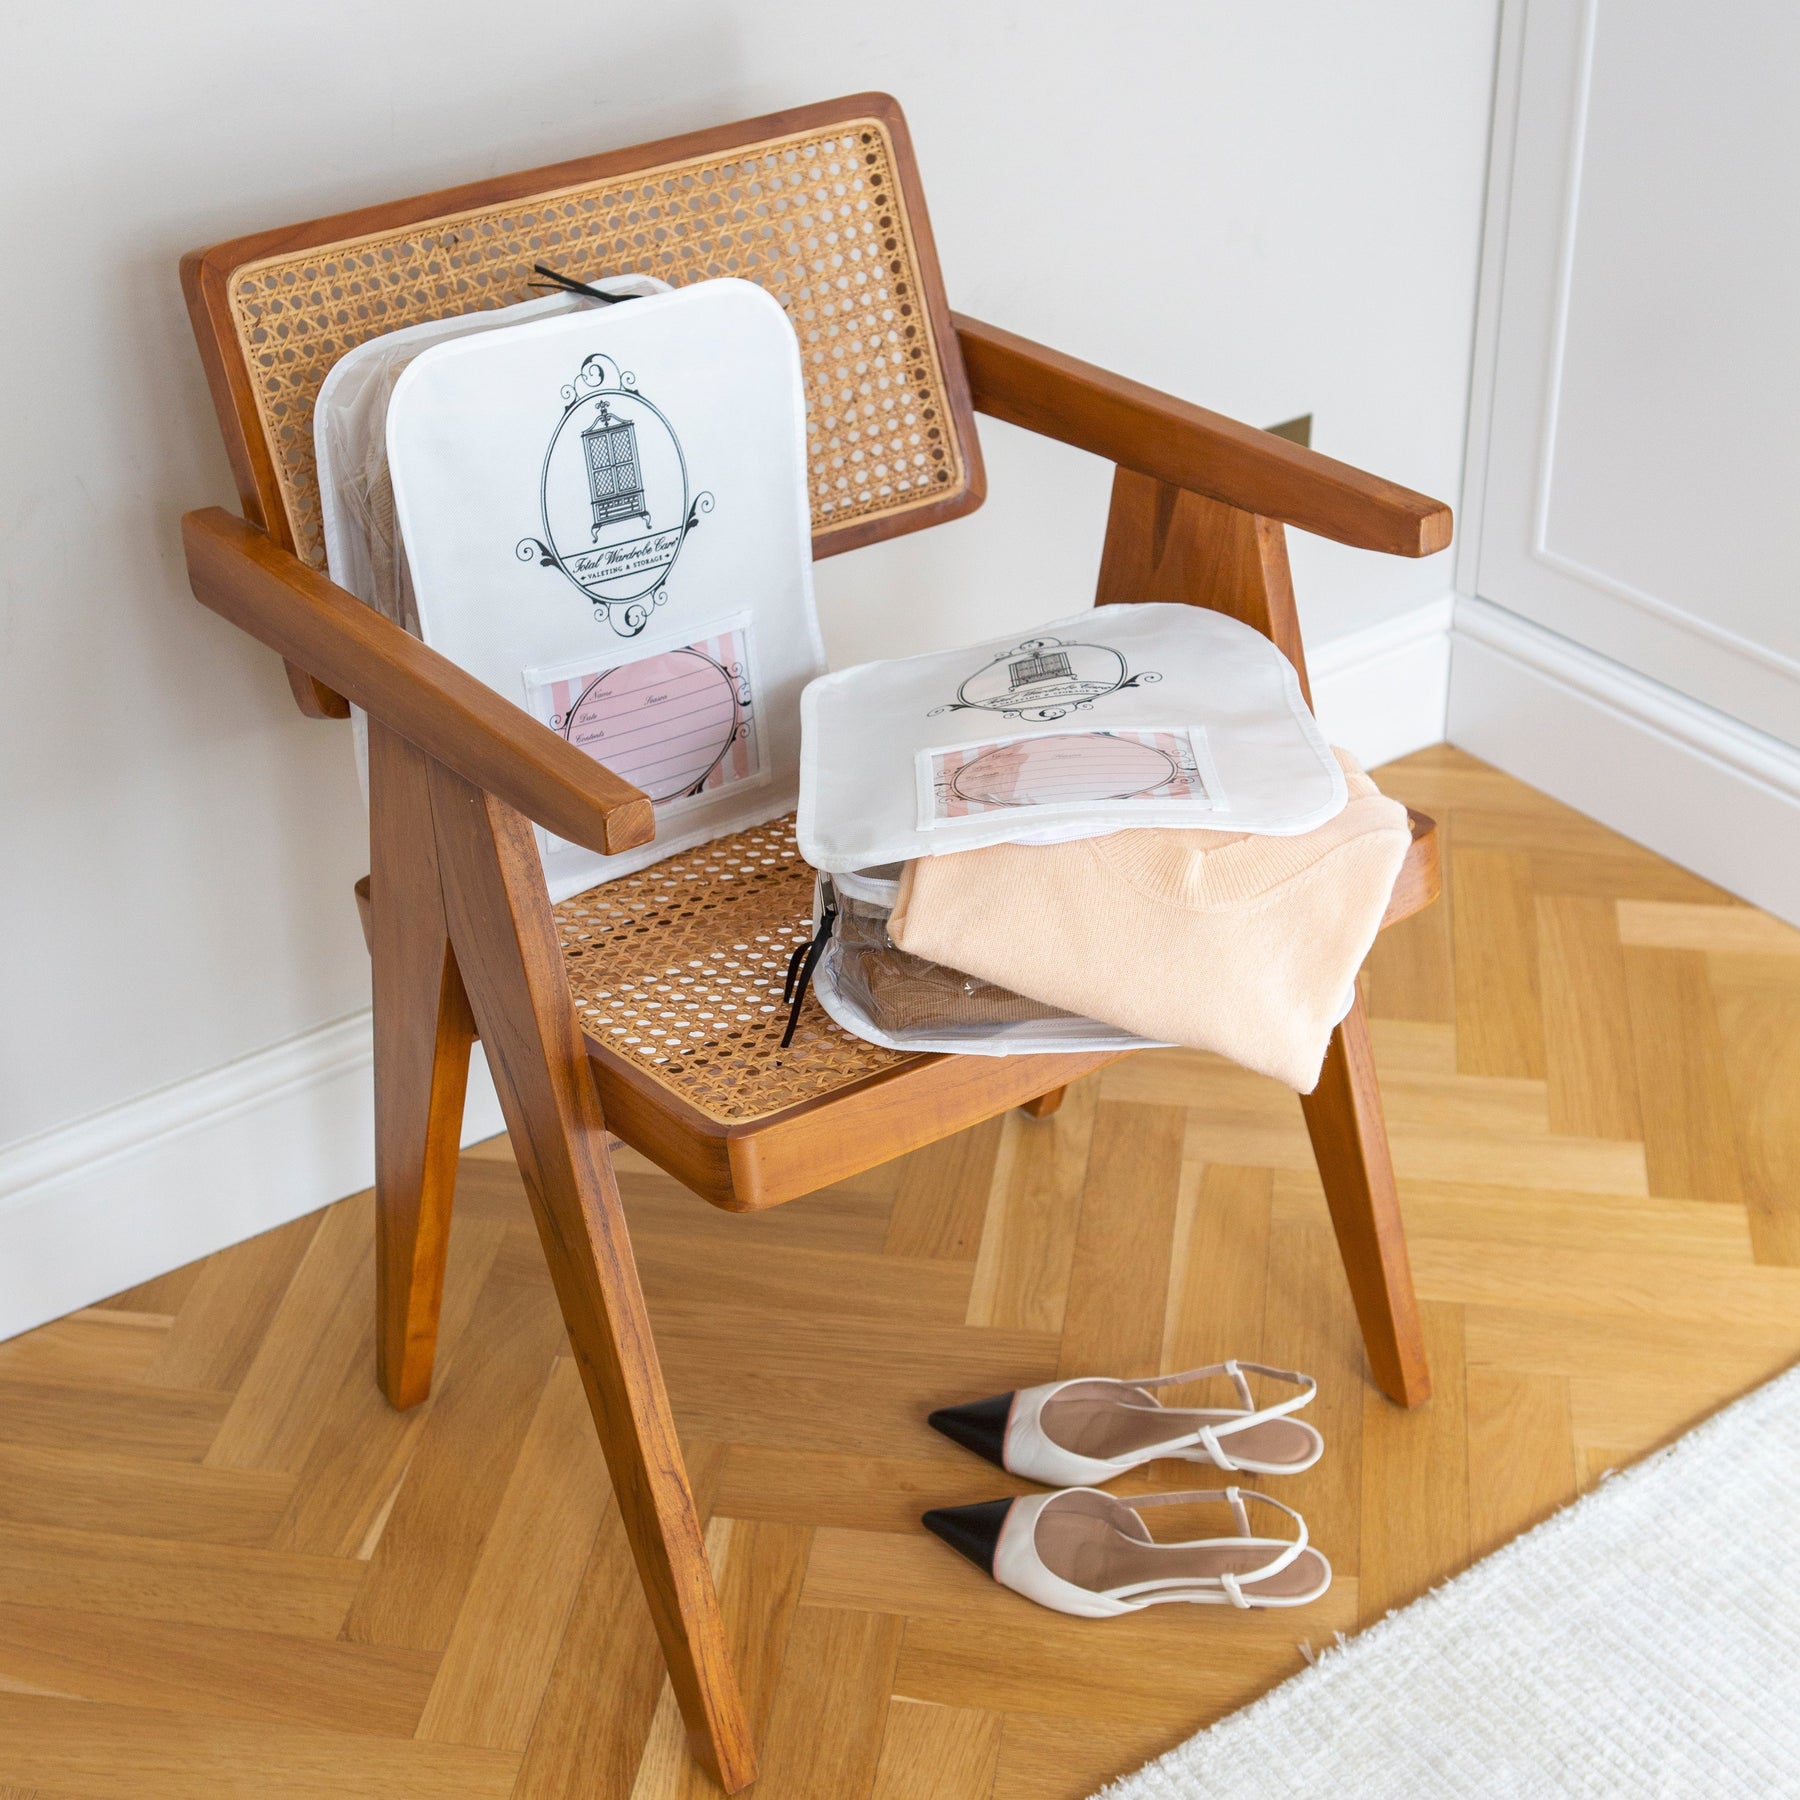 2 Knitwear & T-Shirt Storage bags on wooden chair with strappy shoes to laminated flooring